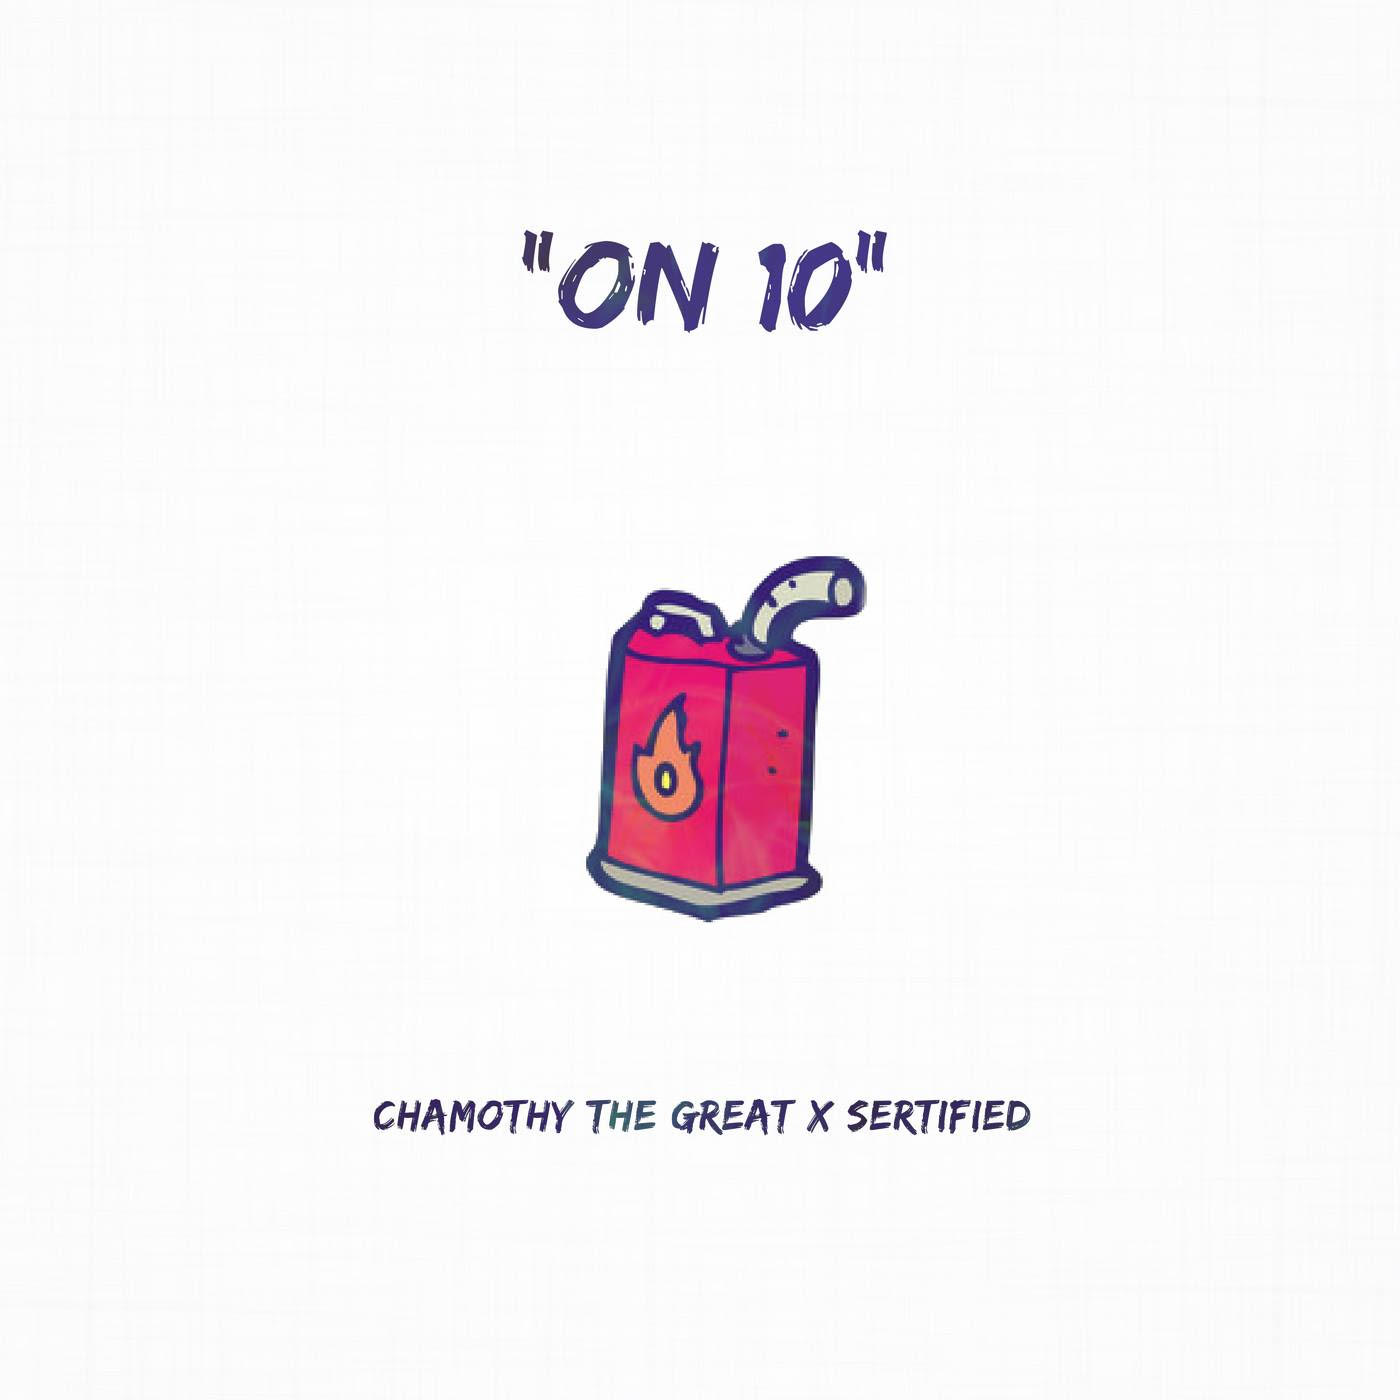 New Music: Chamothy the Great – On 10 Featuring Sertified | @sertied @iamchamothy